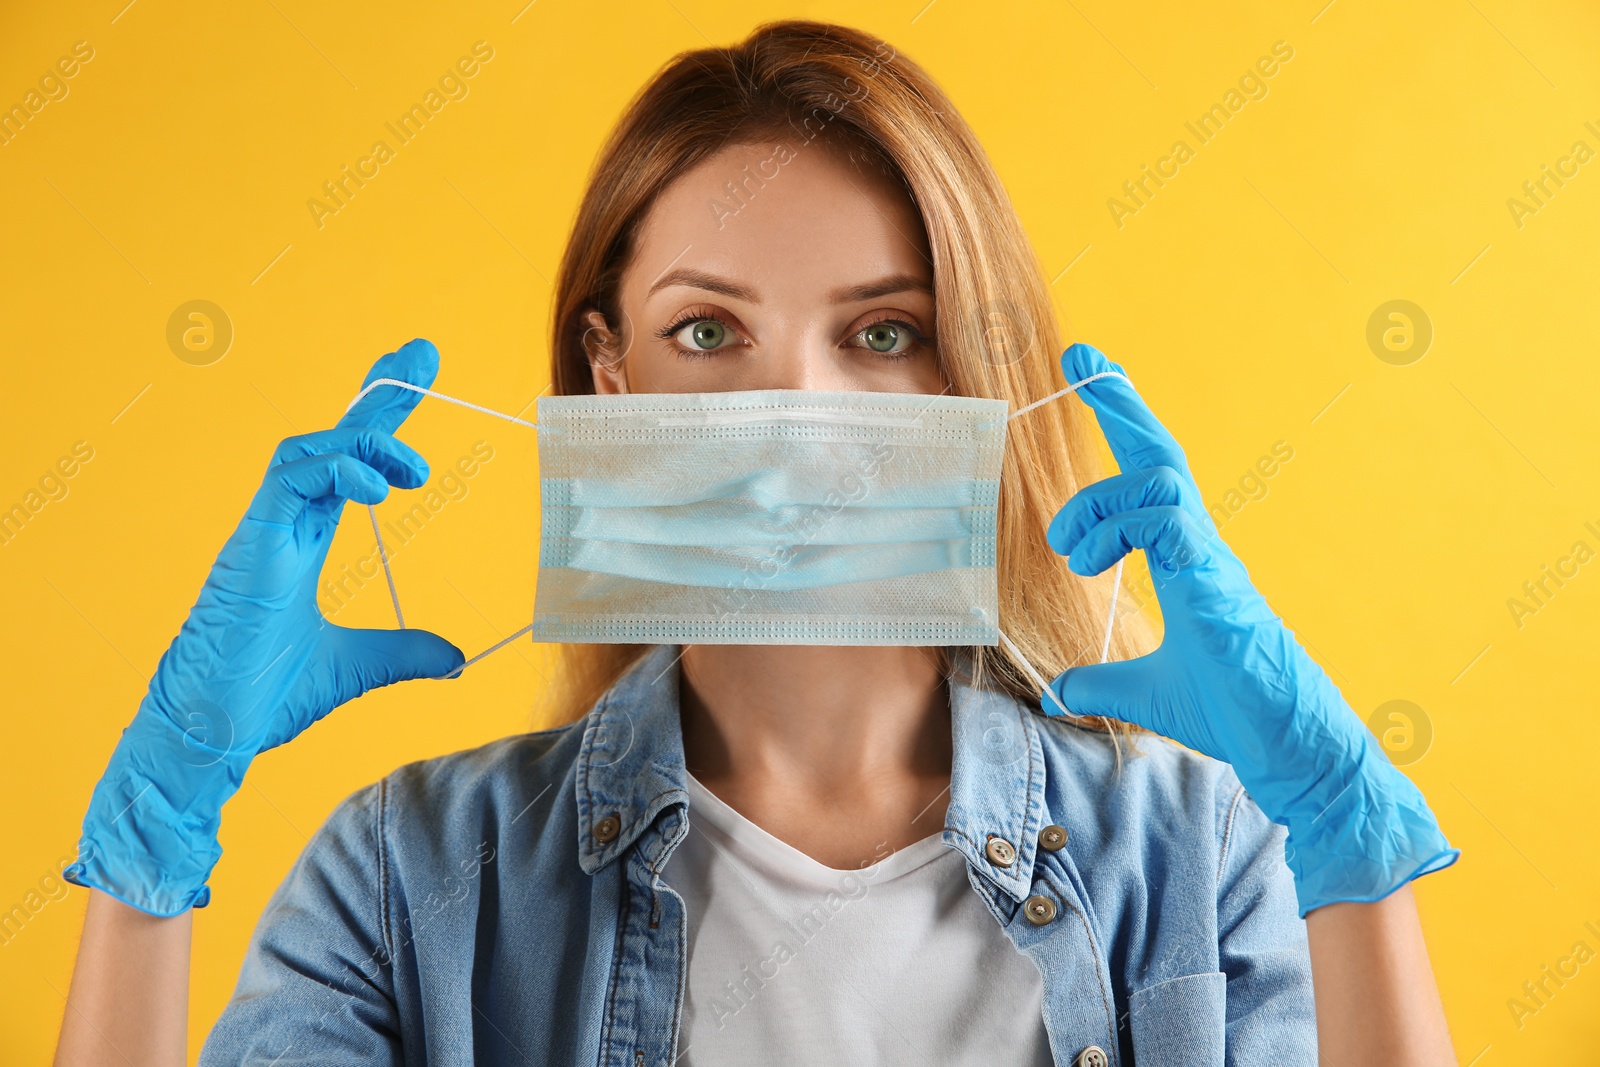 Photo of Young woman in medical gloves putting on protective face mask against yellow background